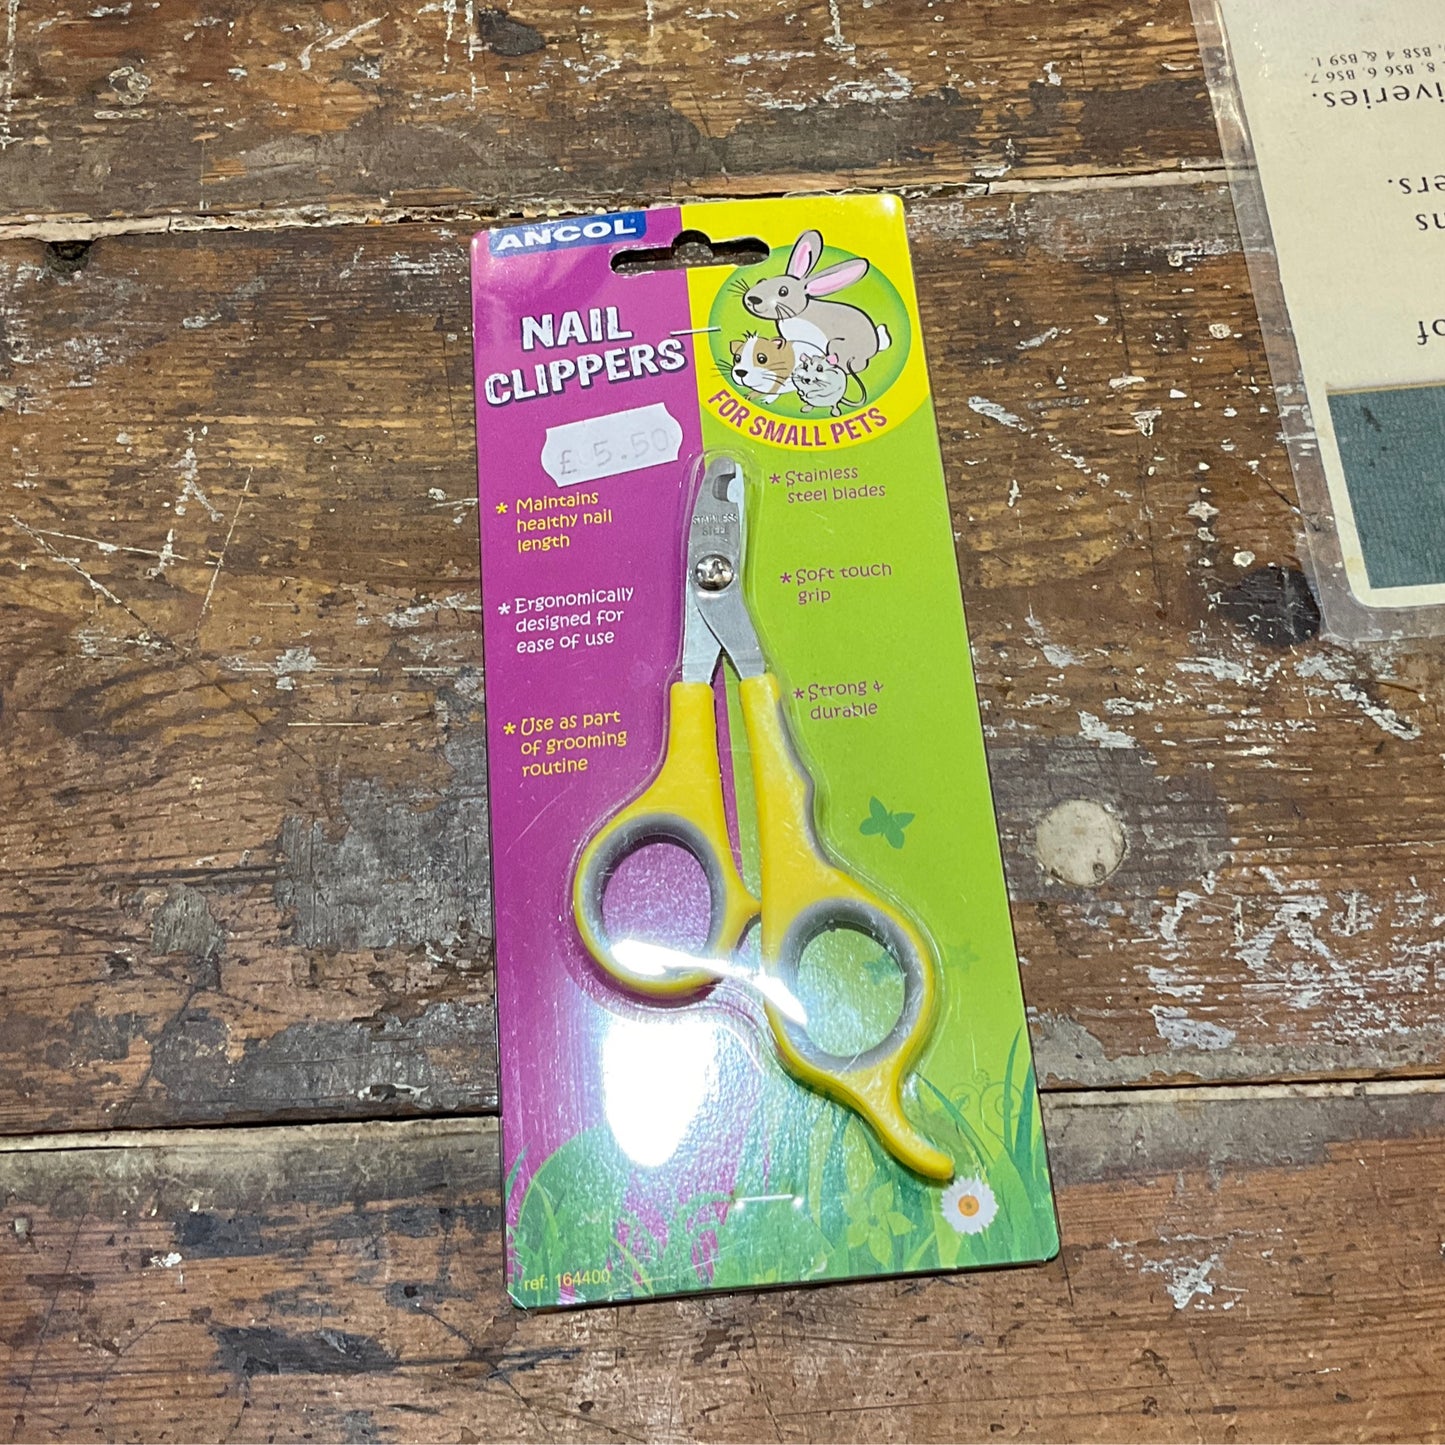 Ancol, Nail Clippers For Small Pets